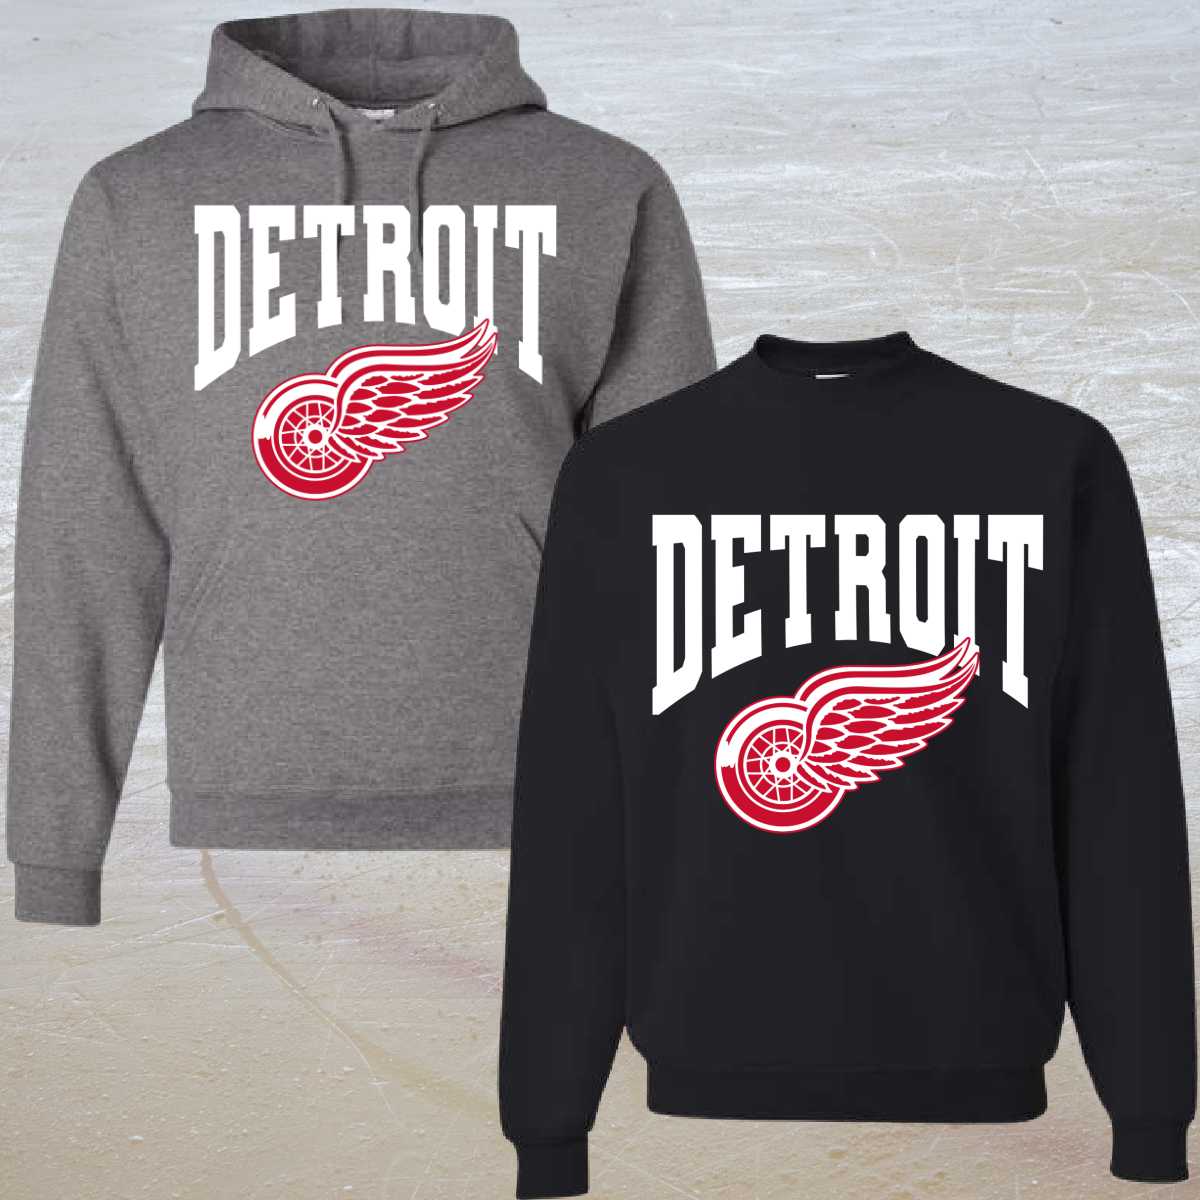 Detroit with Logo Standard Crewneck or Hoodie (Adult) - PREORDER - WILL SHIP BY 3/11